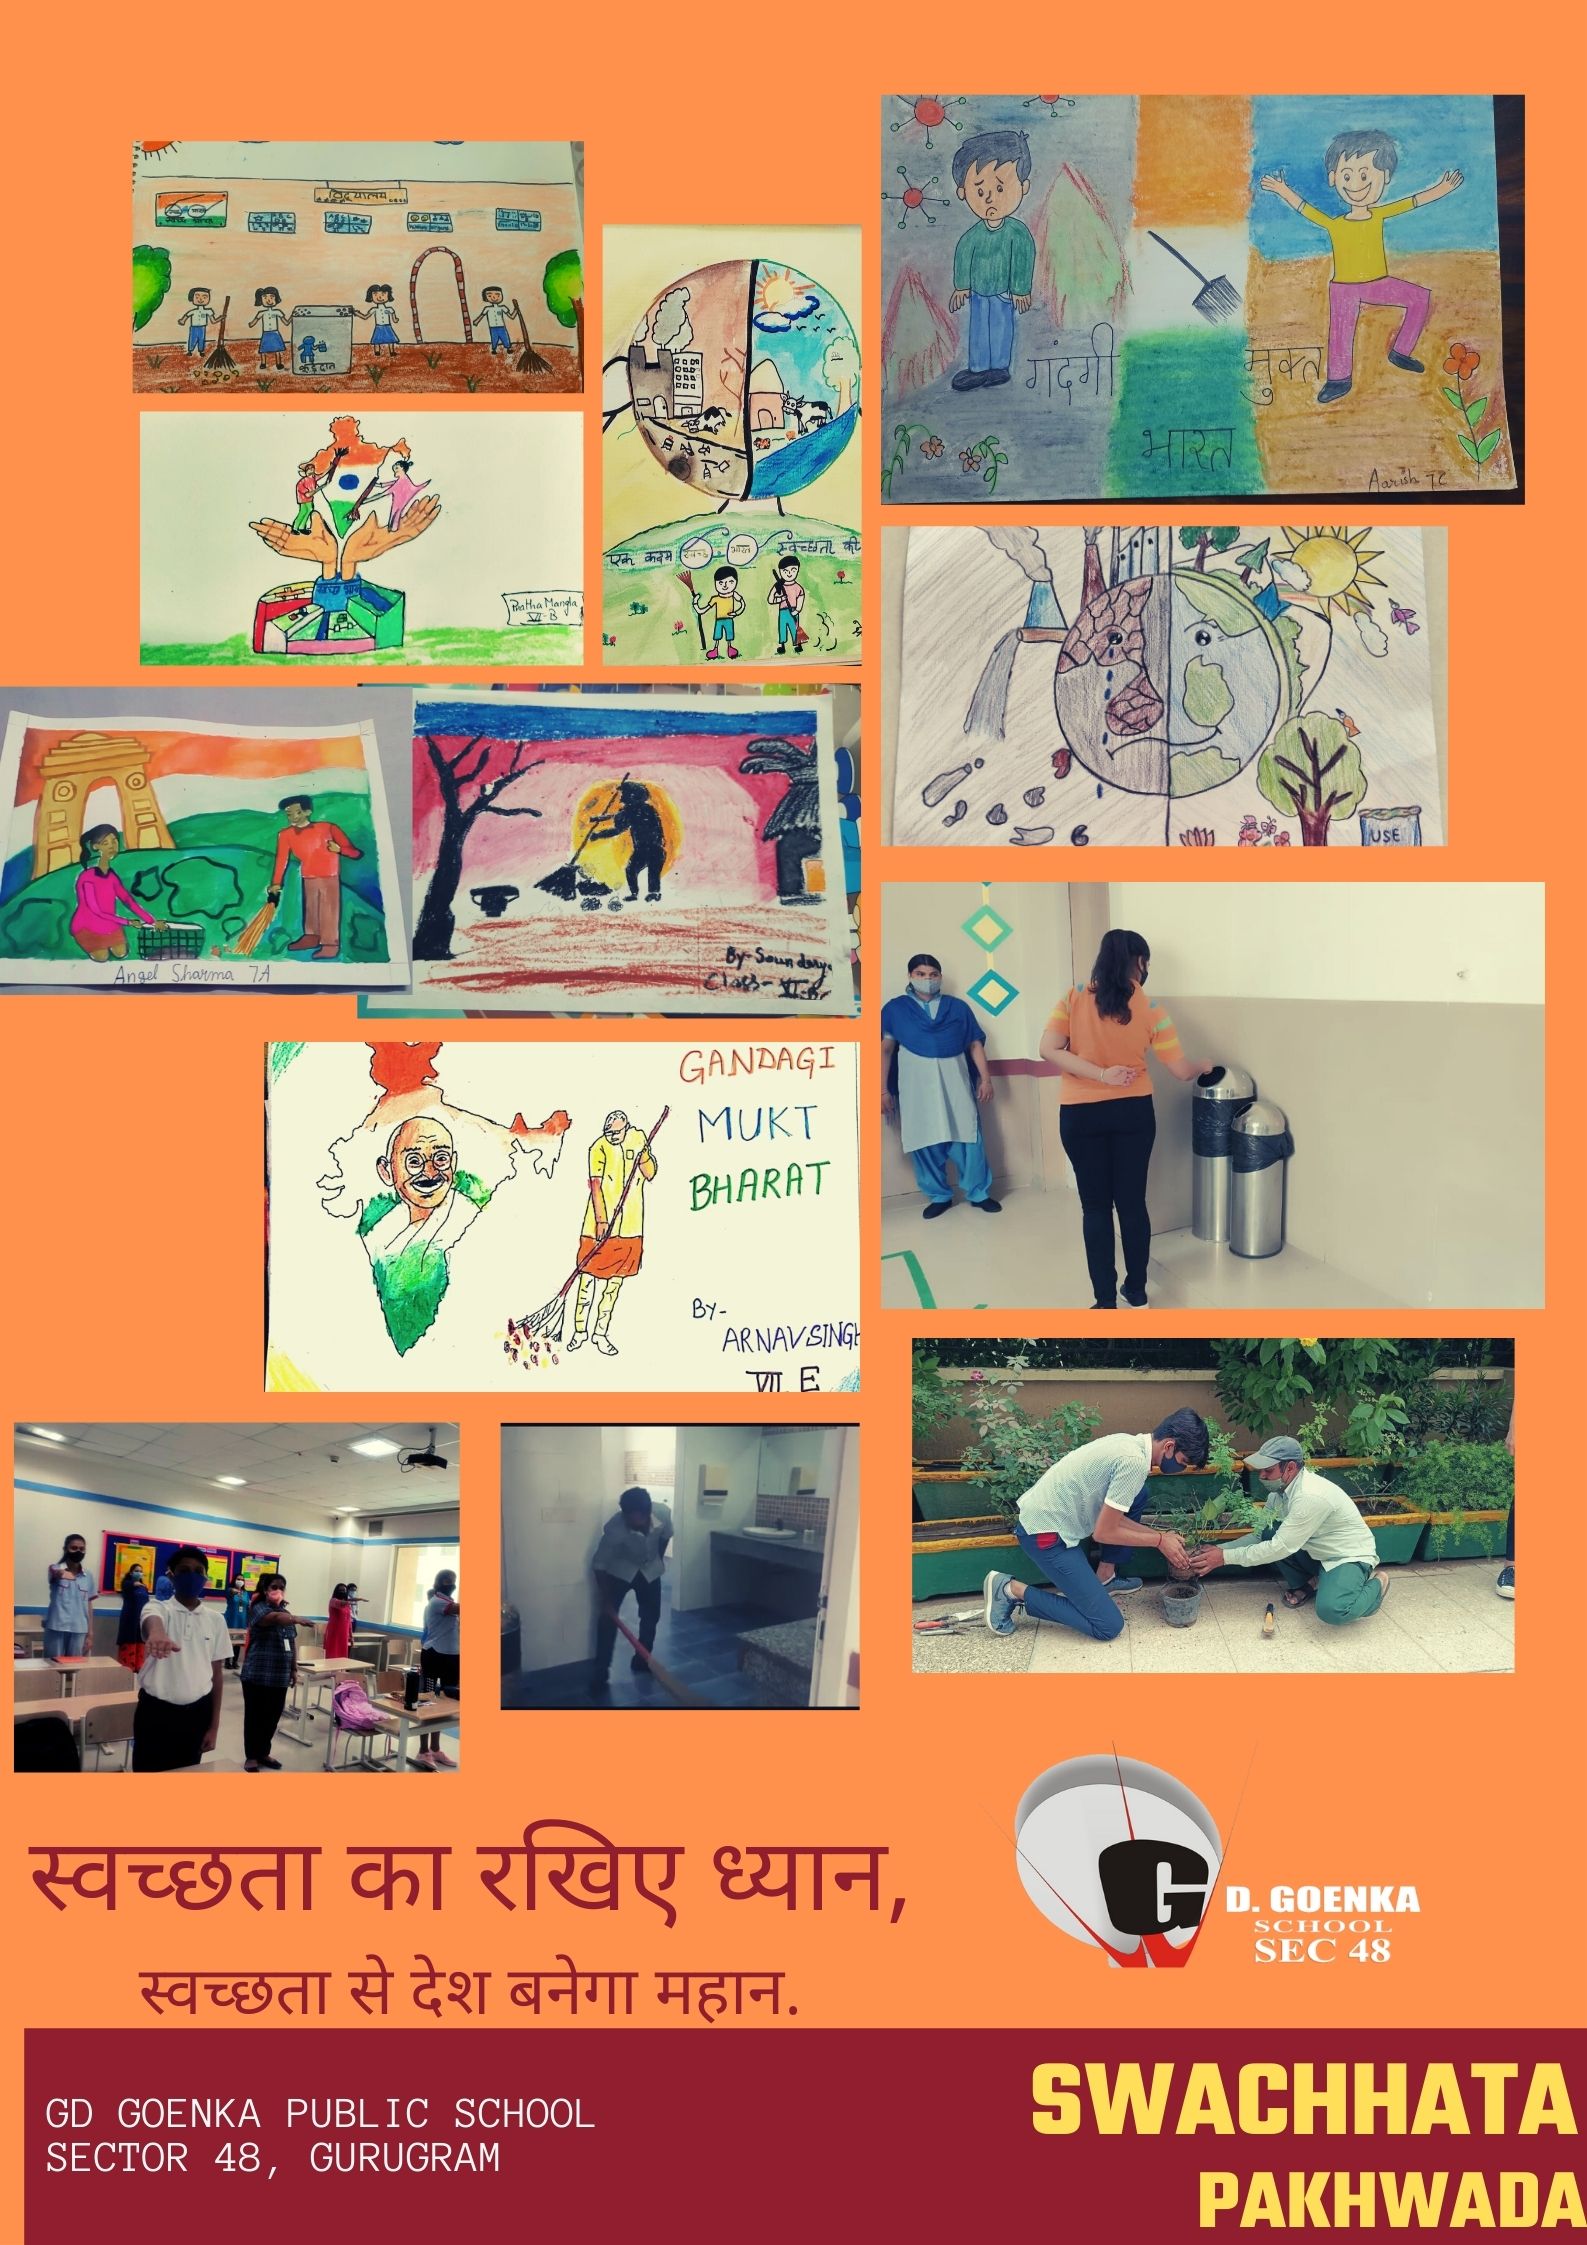 CLEANLINESS DRIVE FOR SWACHH BHARAT – SWACHHATA PAKHWADA